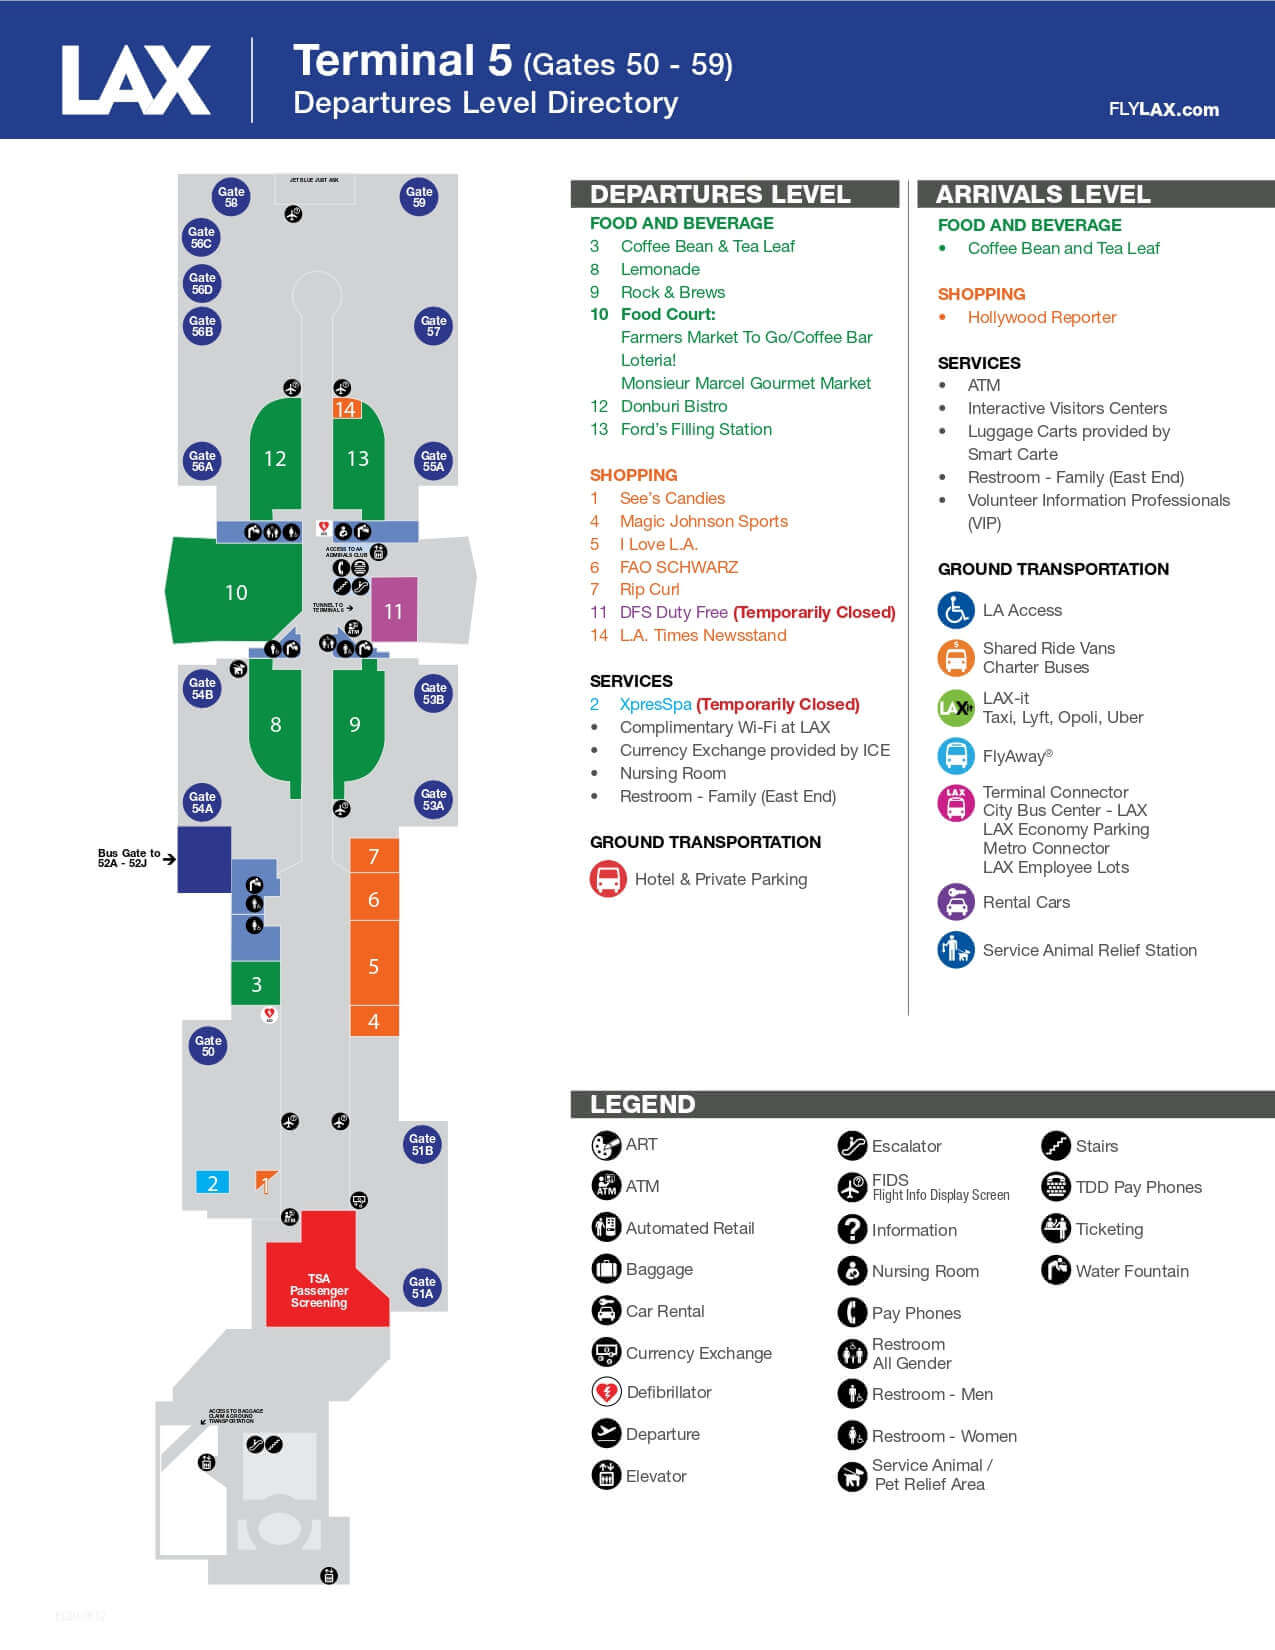 LAX Terminal 5 Map Guide